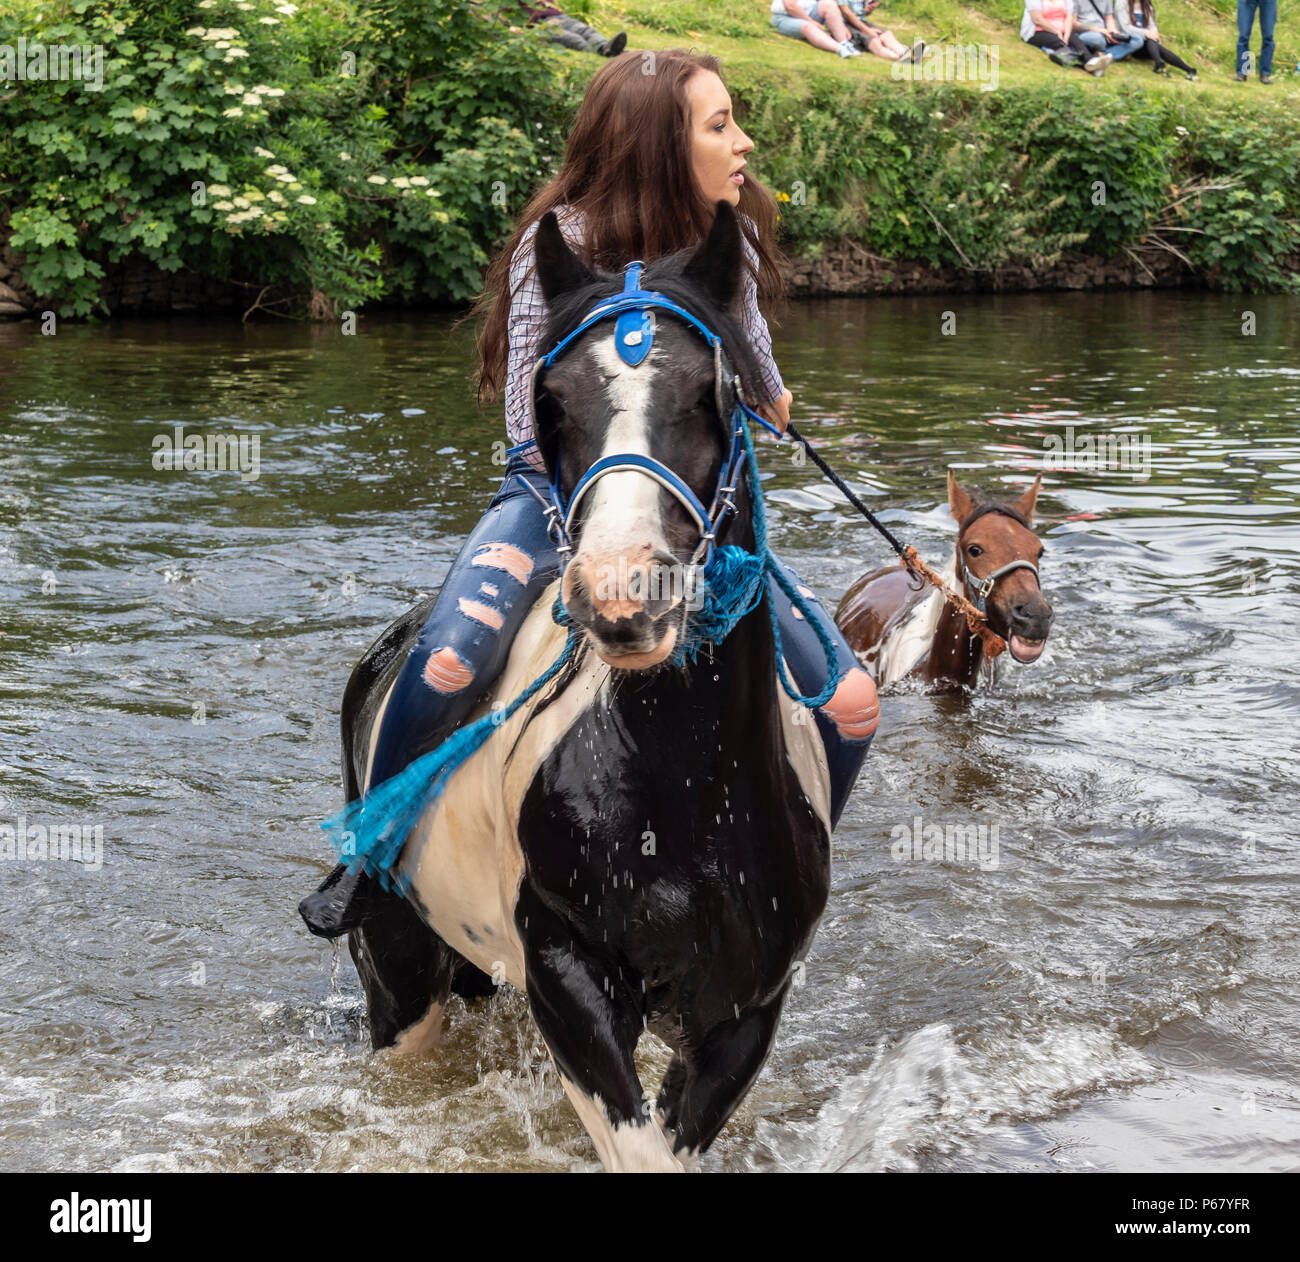 Appleby Horse Fair Cumbria, June 2018. Annual gathering of Gypsies and Travellers in the town of Appleby-in-Westmorland Stock Photo